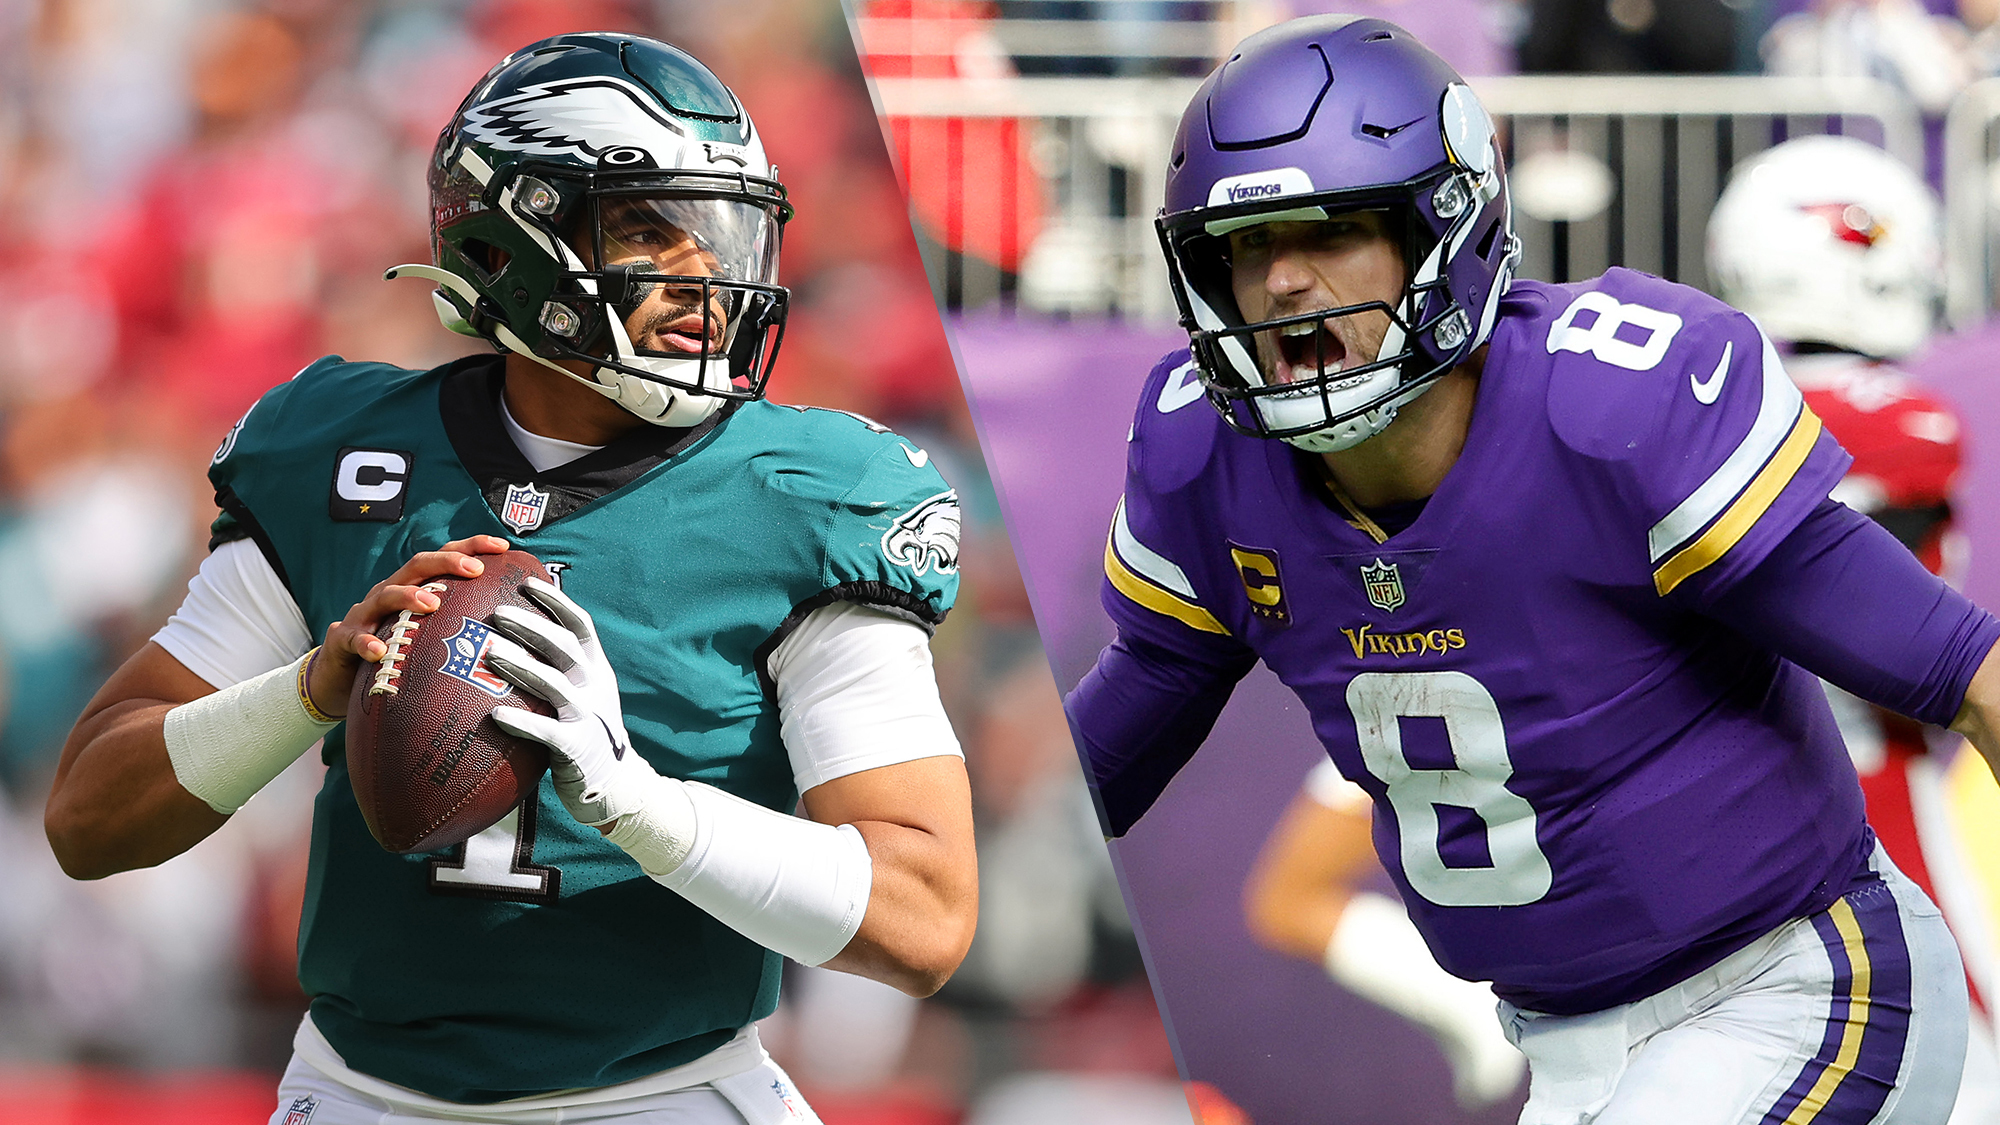 Vikings vs. Eagles live stream: How to watch NFL game online tonight